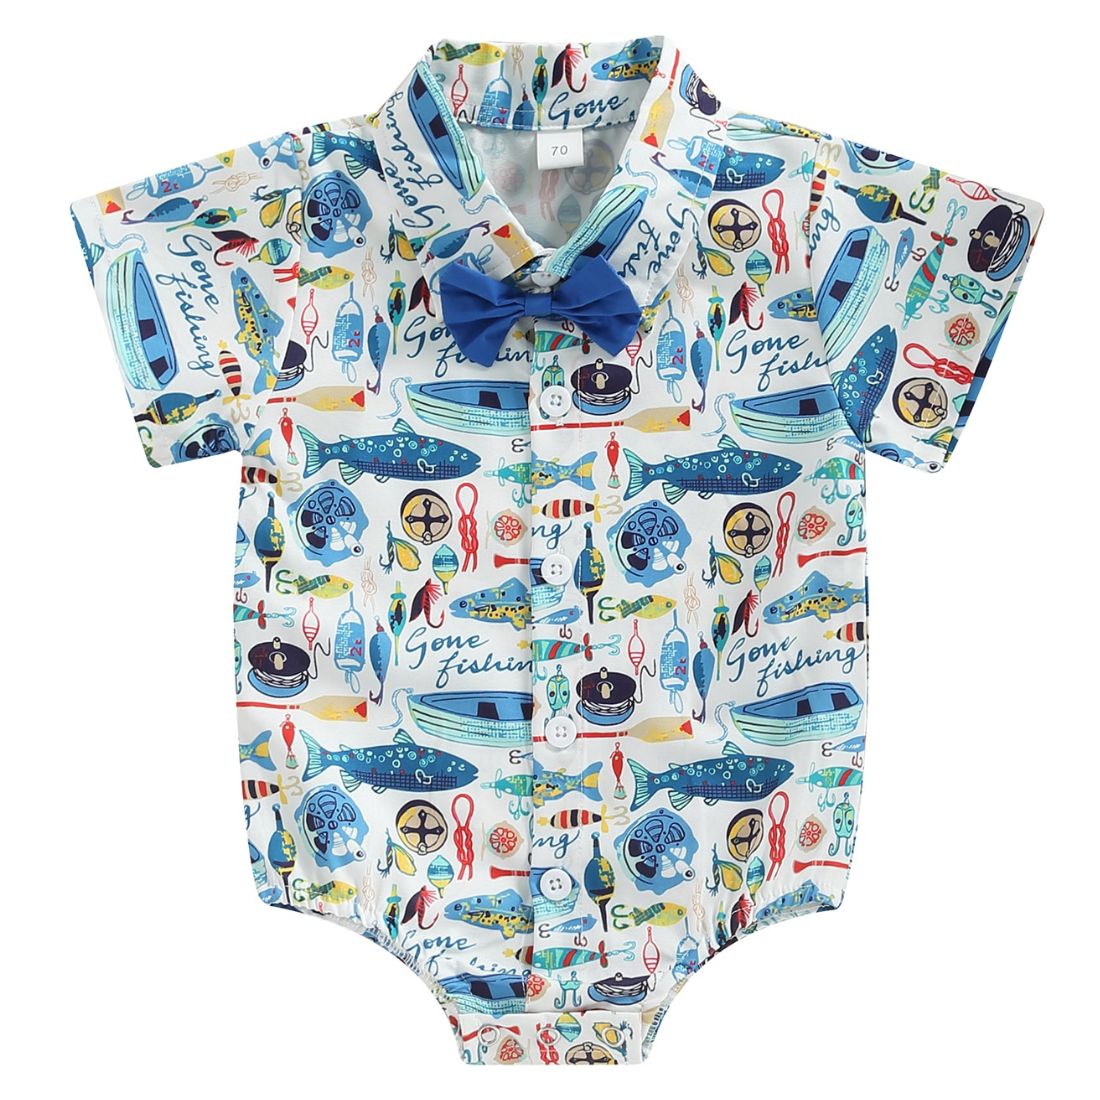 Baby Boy Gone Fishin Collar Bodysuit - My Trendy Youngsters - Show Now! Discover the trendiest bodysuits for your little man! Get yours today!